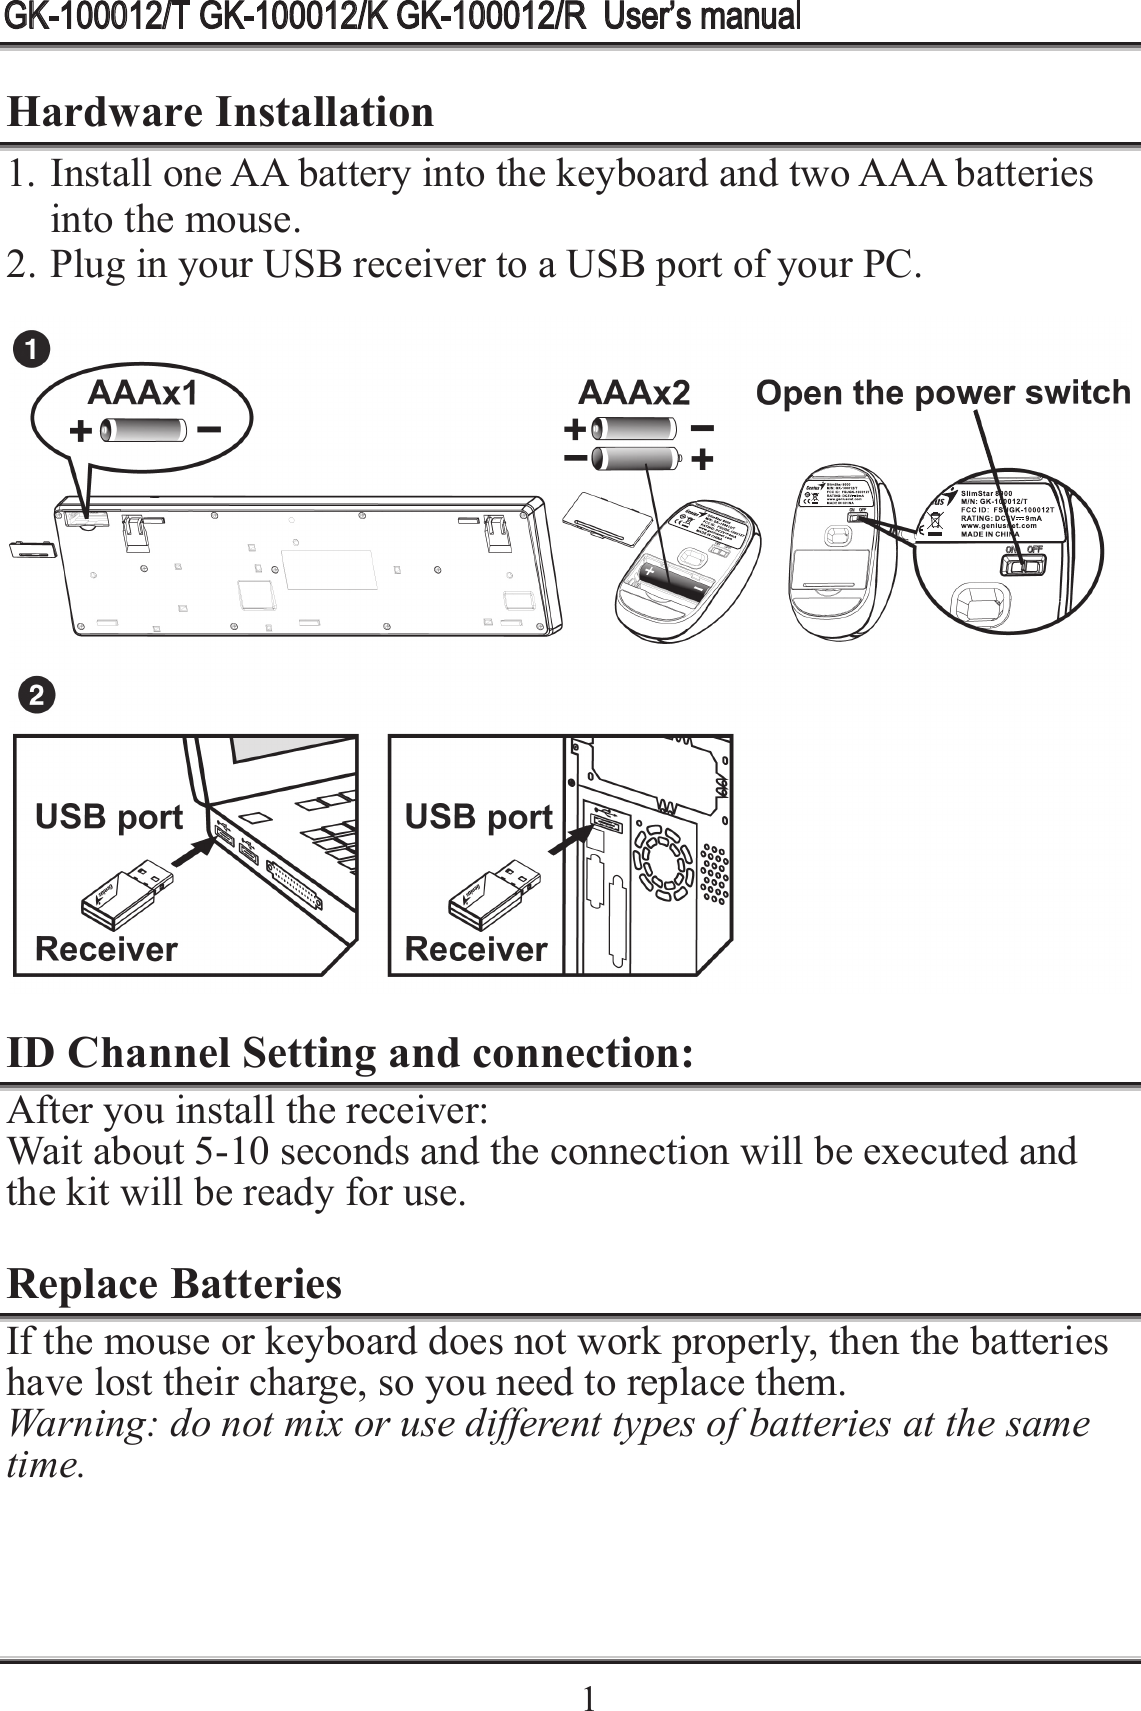    1Hardware Installation 1. Install one AA battery into the keyboard and two AAA batteries into the mouse. 2. Plug in your USB receiver to a USB port of your PC.    ID Channel Setting and connection: After you install the receiver: Wait about 5-10 seconds and the connection will be executed and the kit will be ready for use.  Replace Batteries If the mouse or keyboard does not work properly, then the batteries have lost their charge, so you need to replace them. Warning: do not mix or use different types of batteries at the same time.  GK-100012/T GK-100012/K GK-100012/R  User’s manual